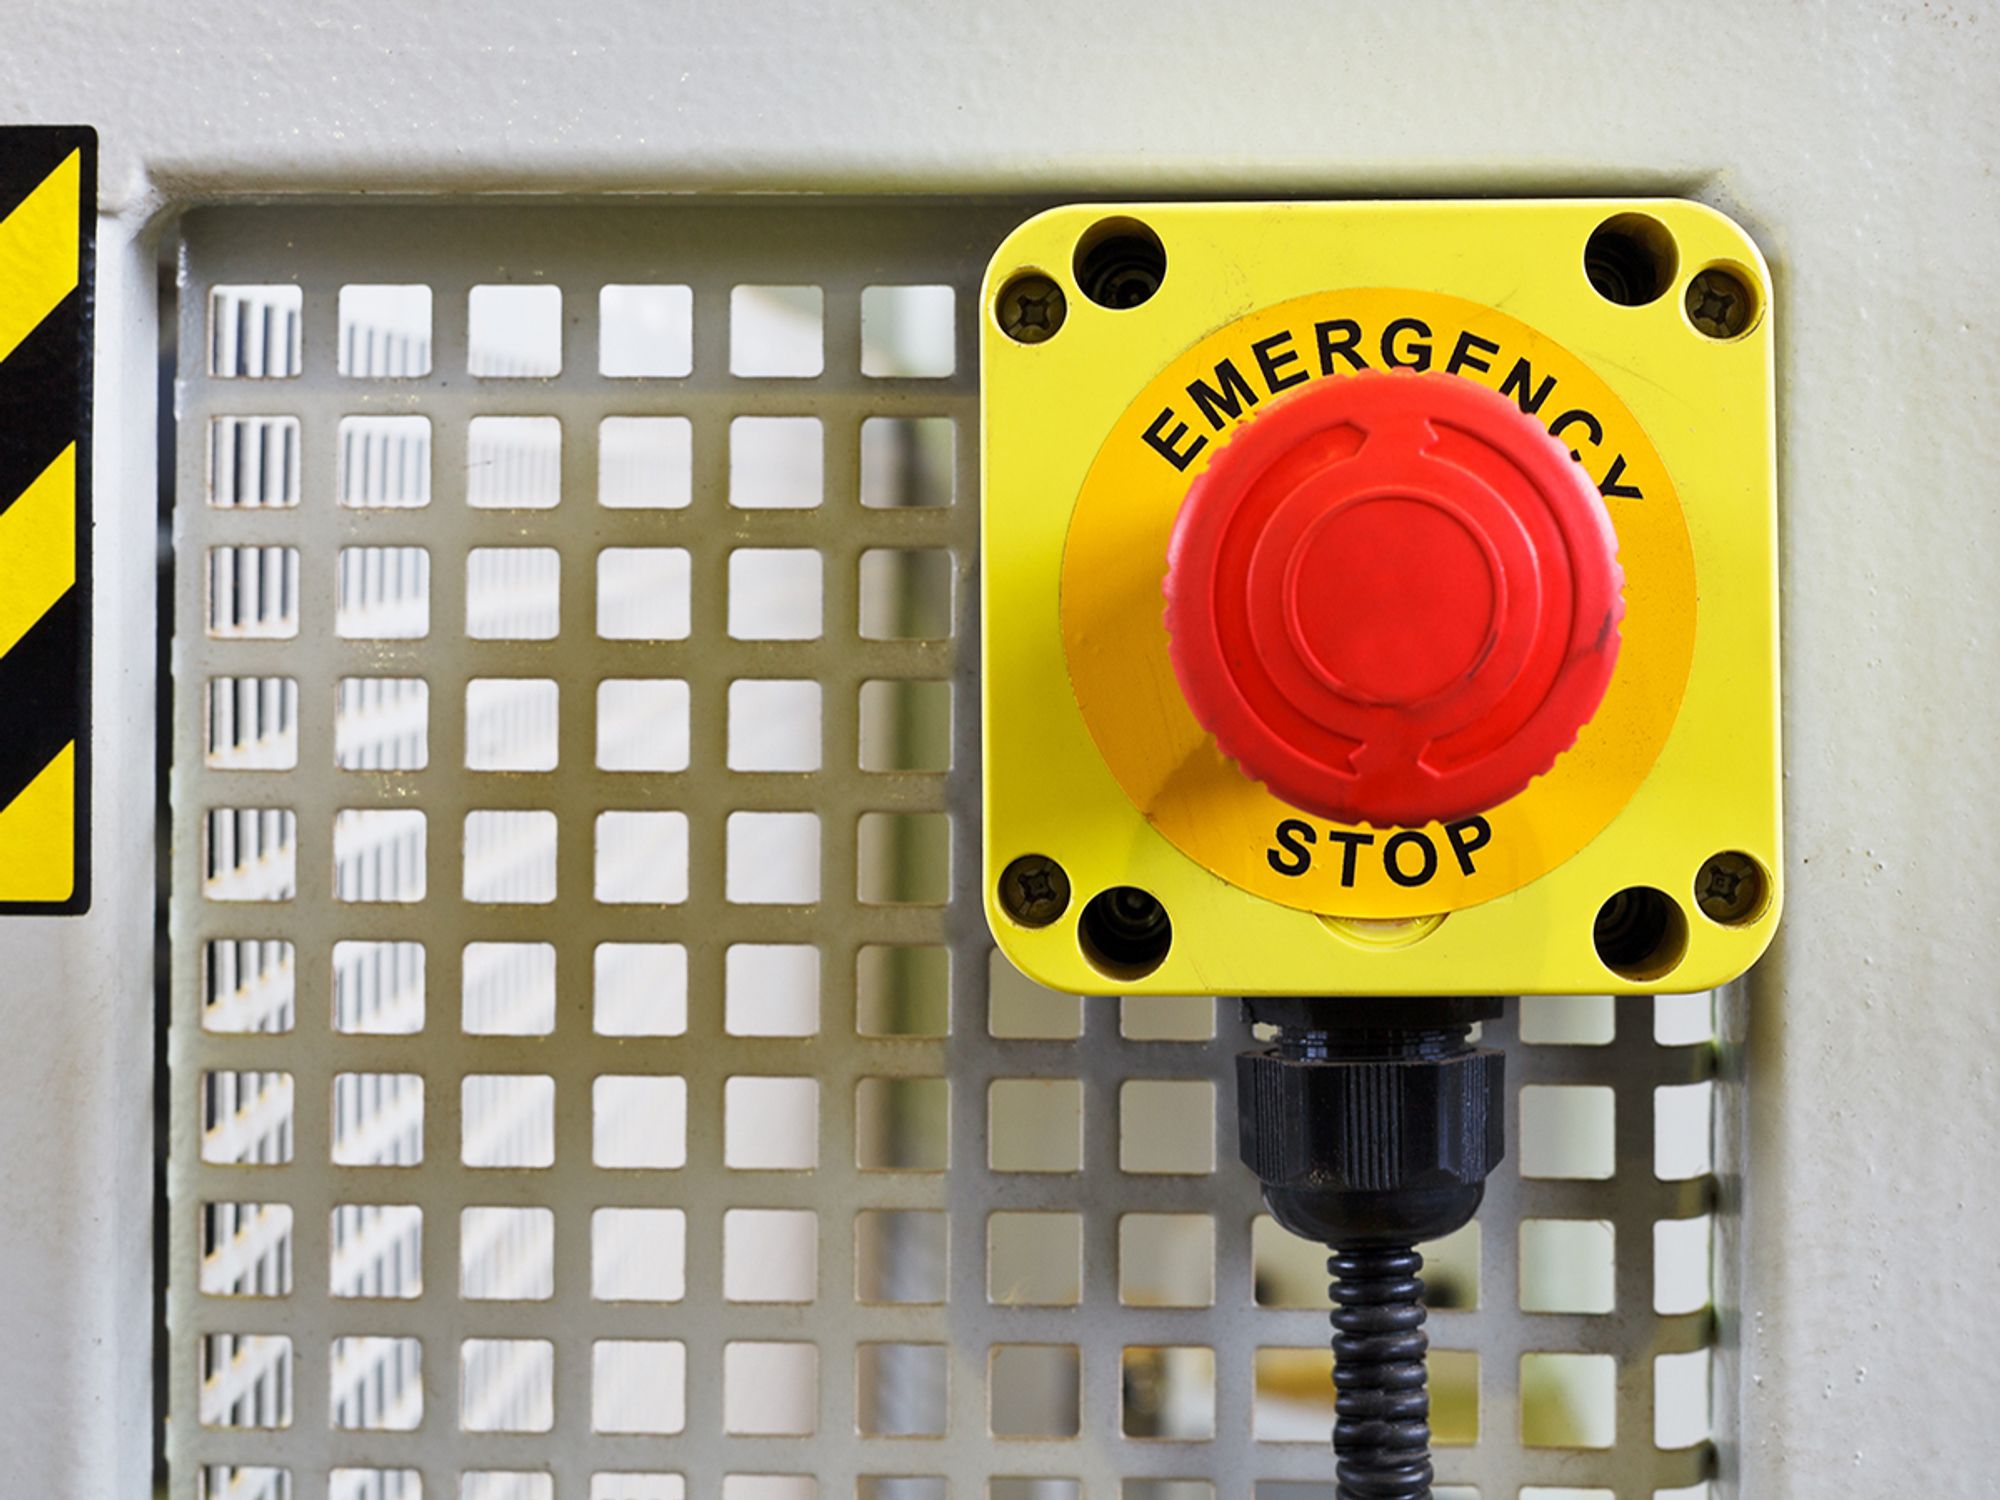 What are the OSHA requirements for emergency stop devices?